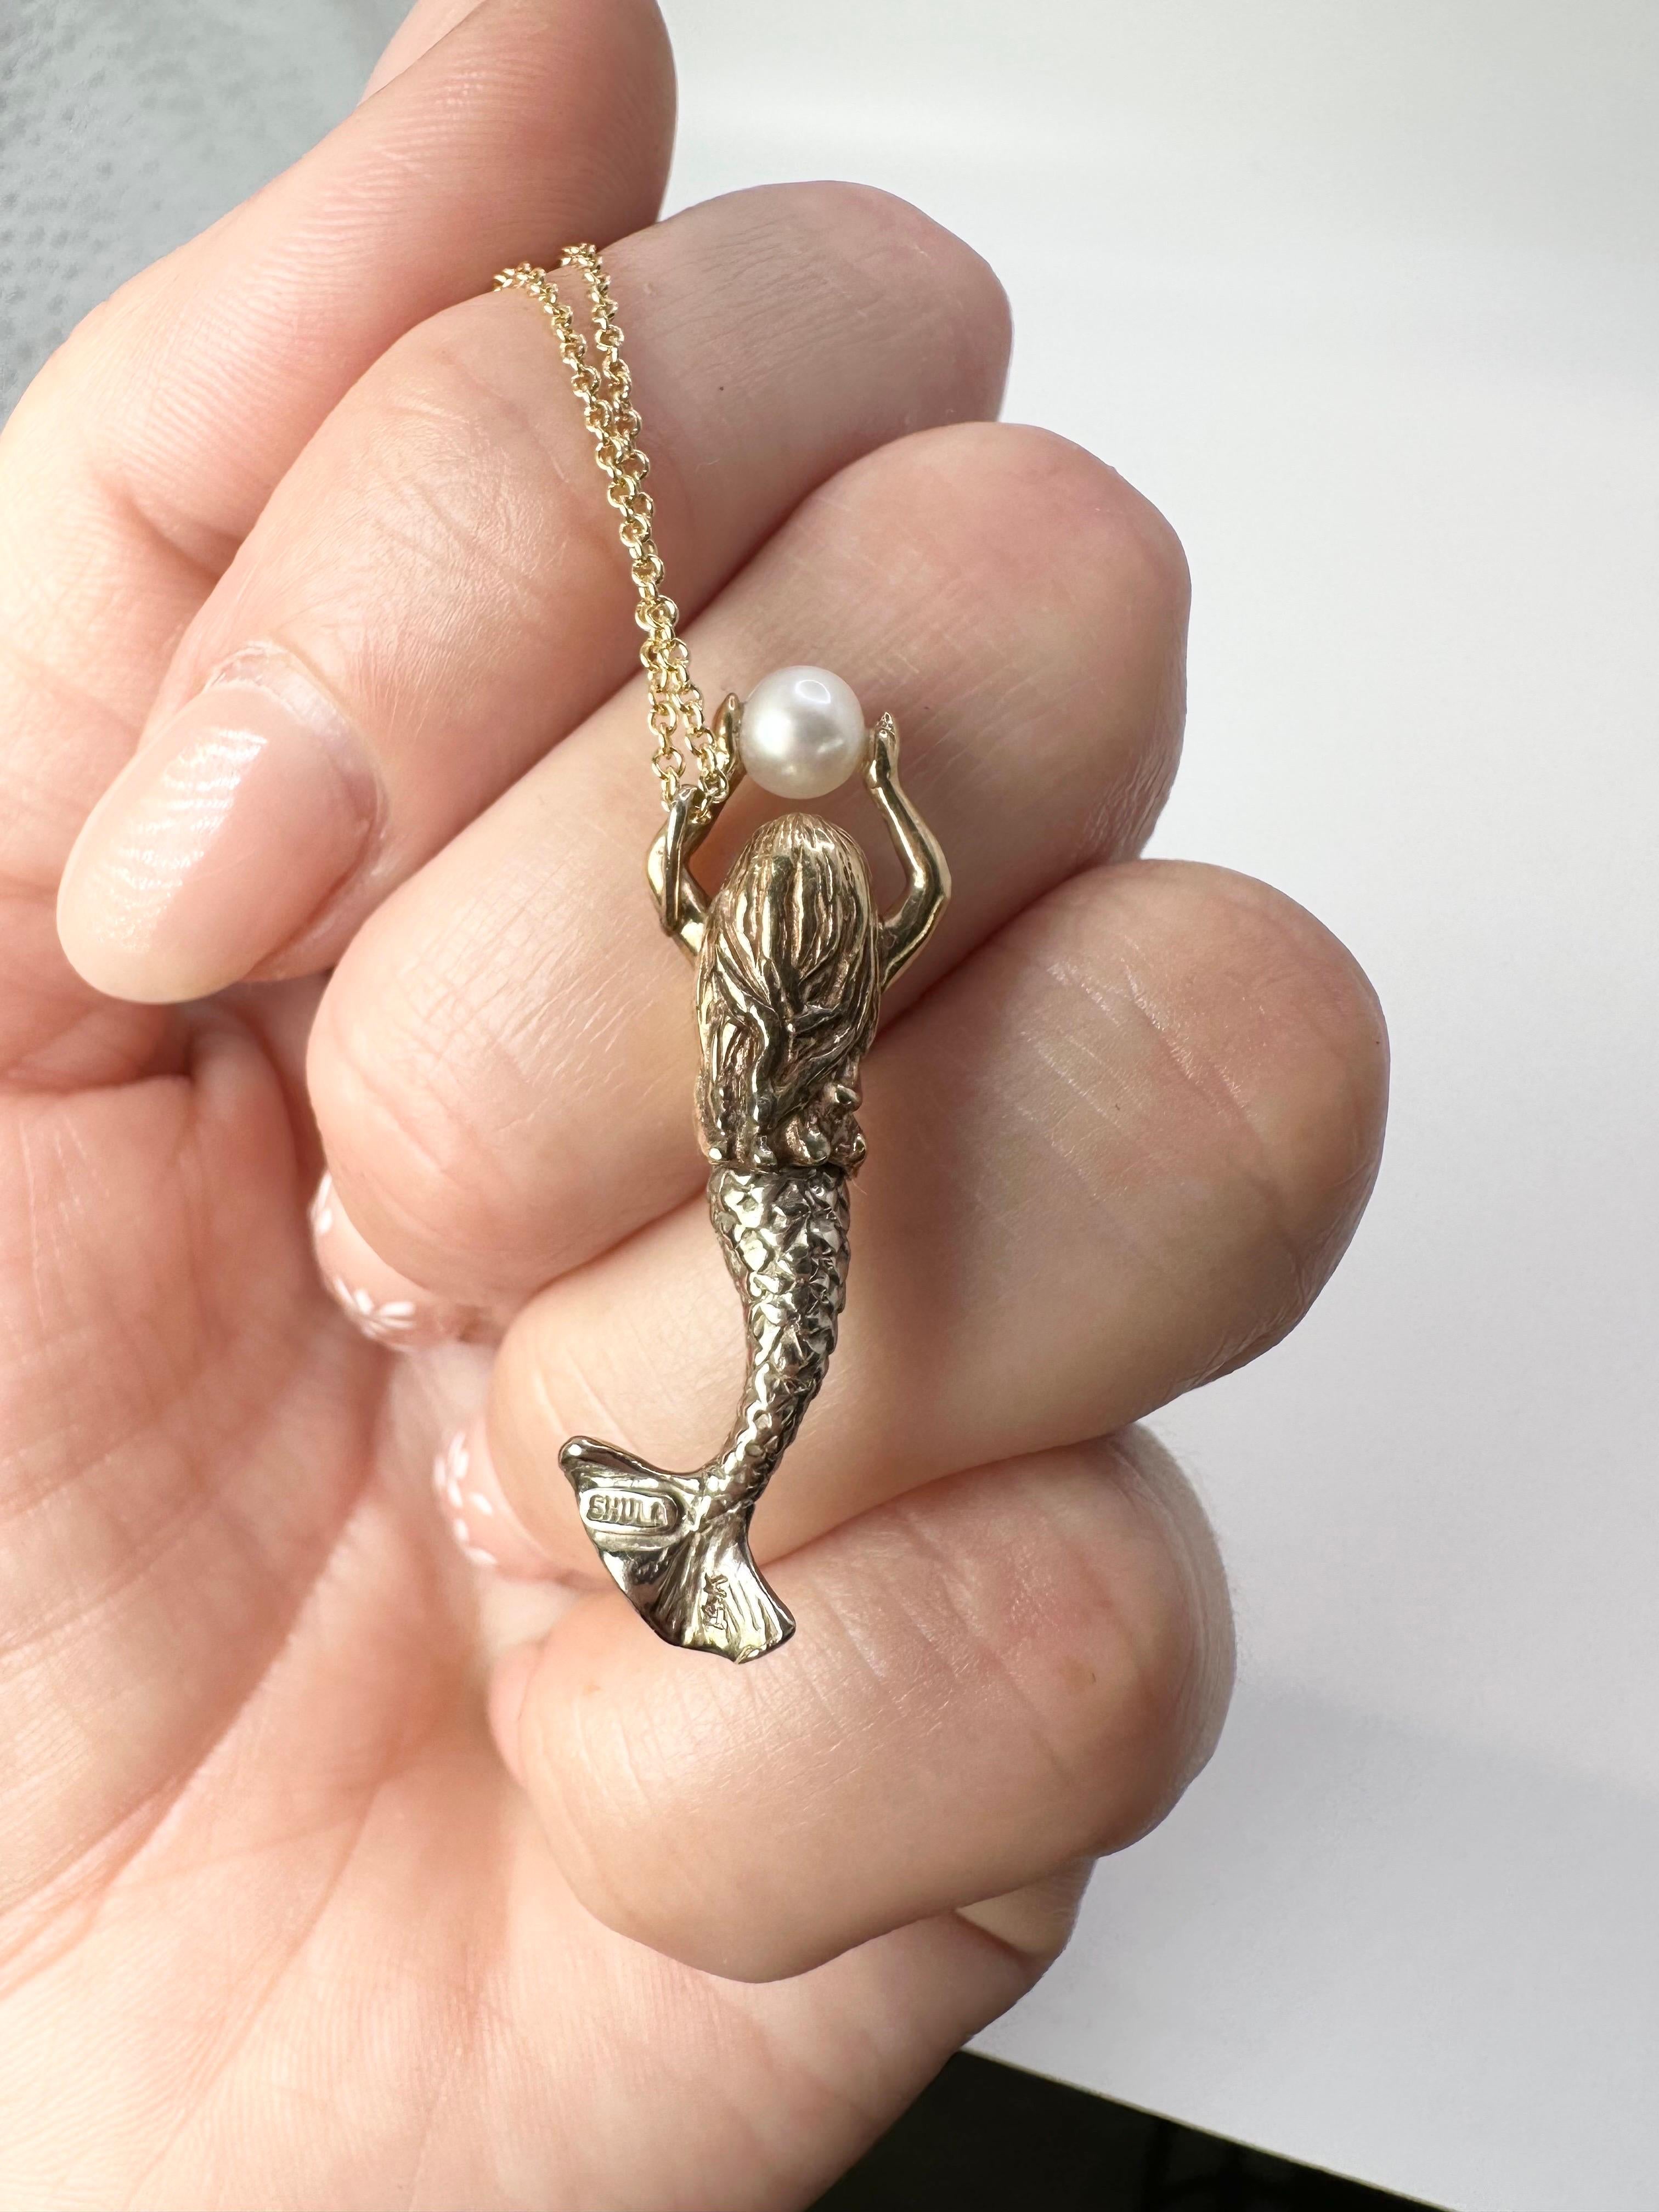 Round Cut Mermaid Pearl Pendant Necklace Unique Hand Engraved Pendant 14kt Yellow Gold For Sale